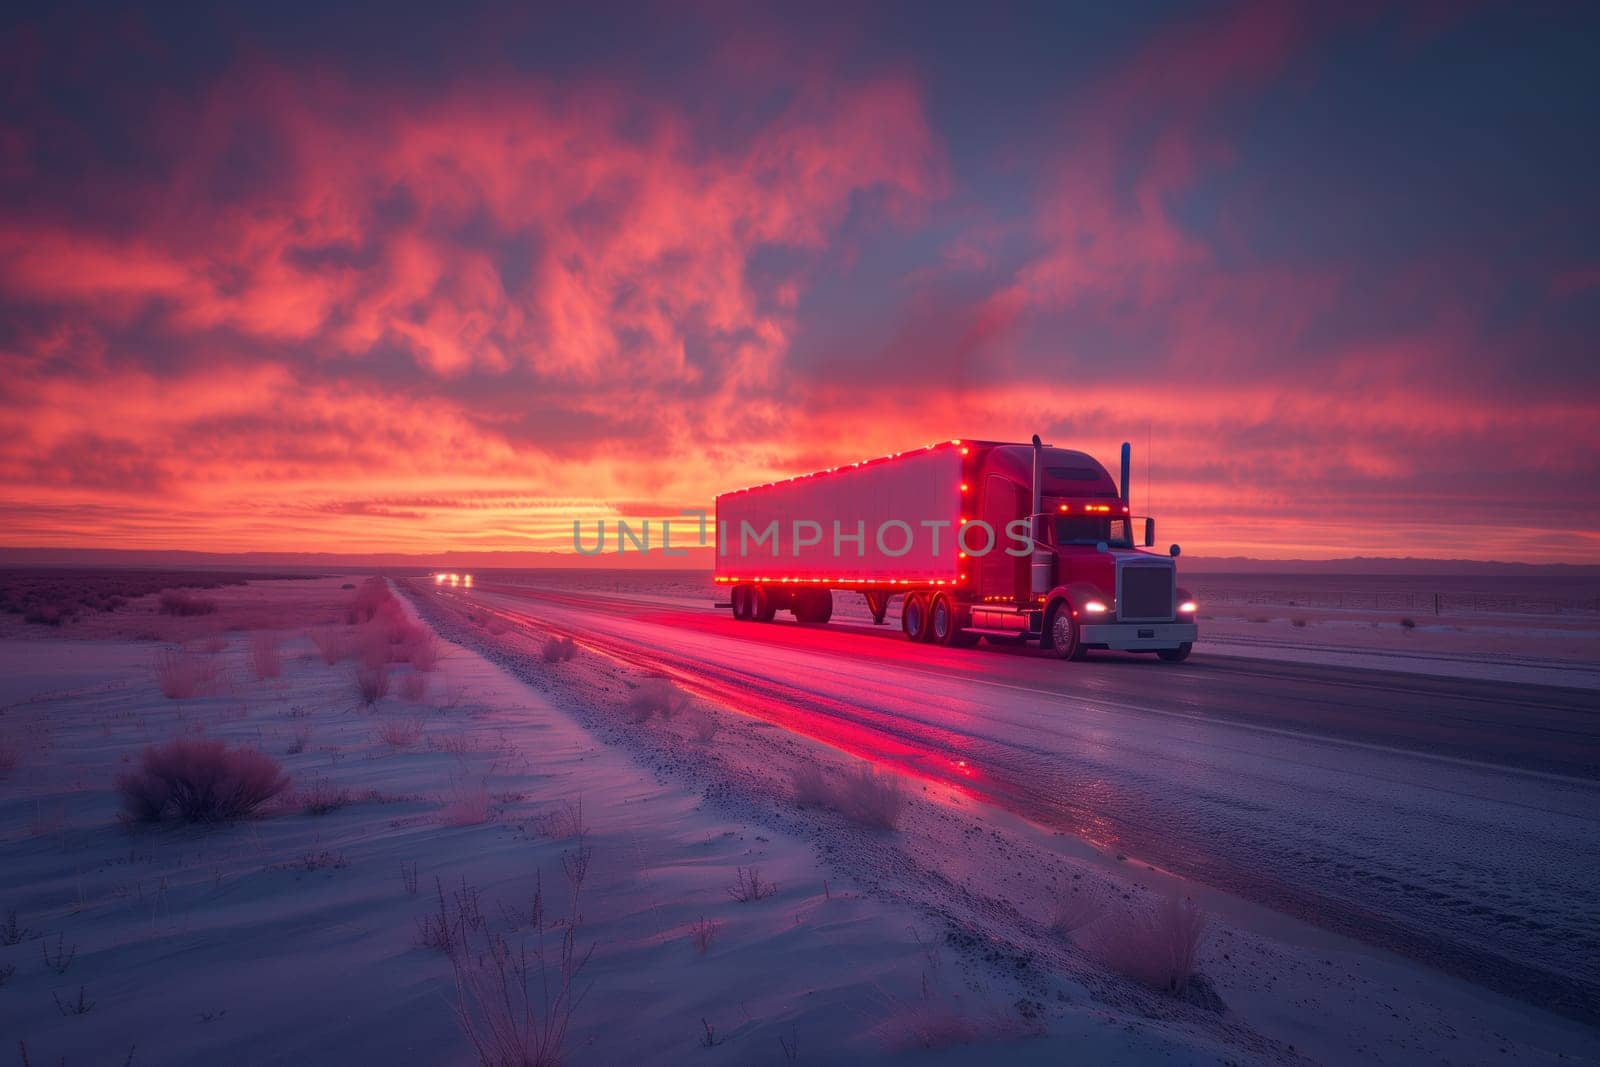 A truck is rolling down a snowy highway under a sunset sky, with clouds reflecting automotive lighting off its tires and wheels